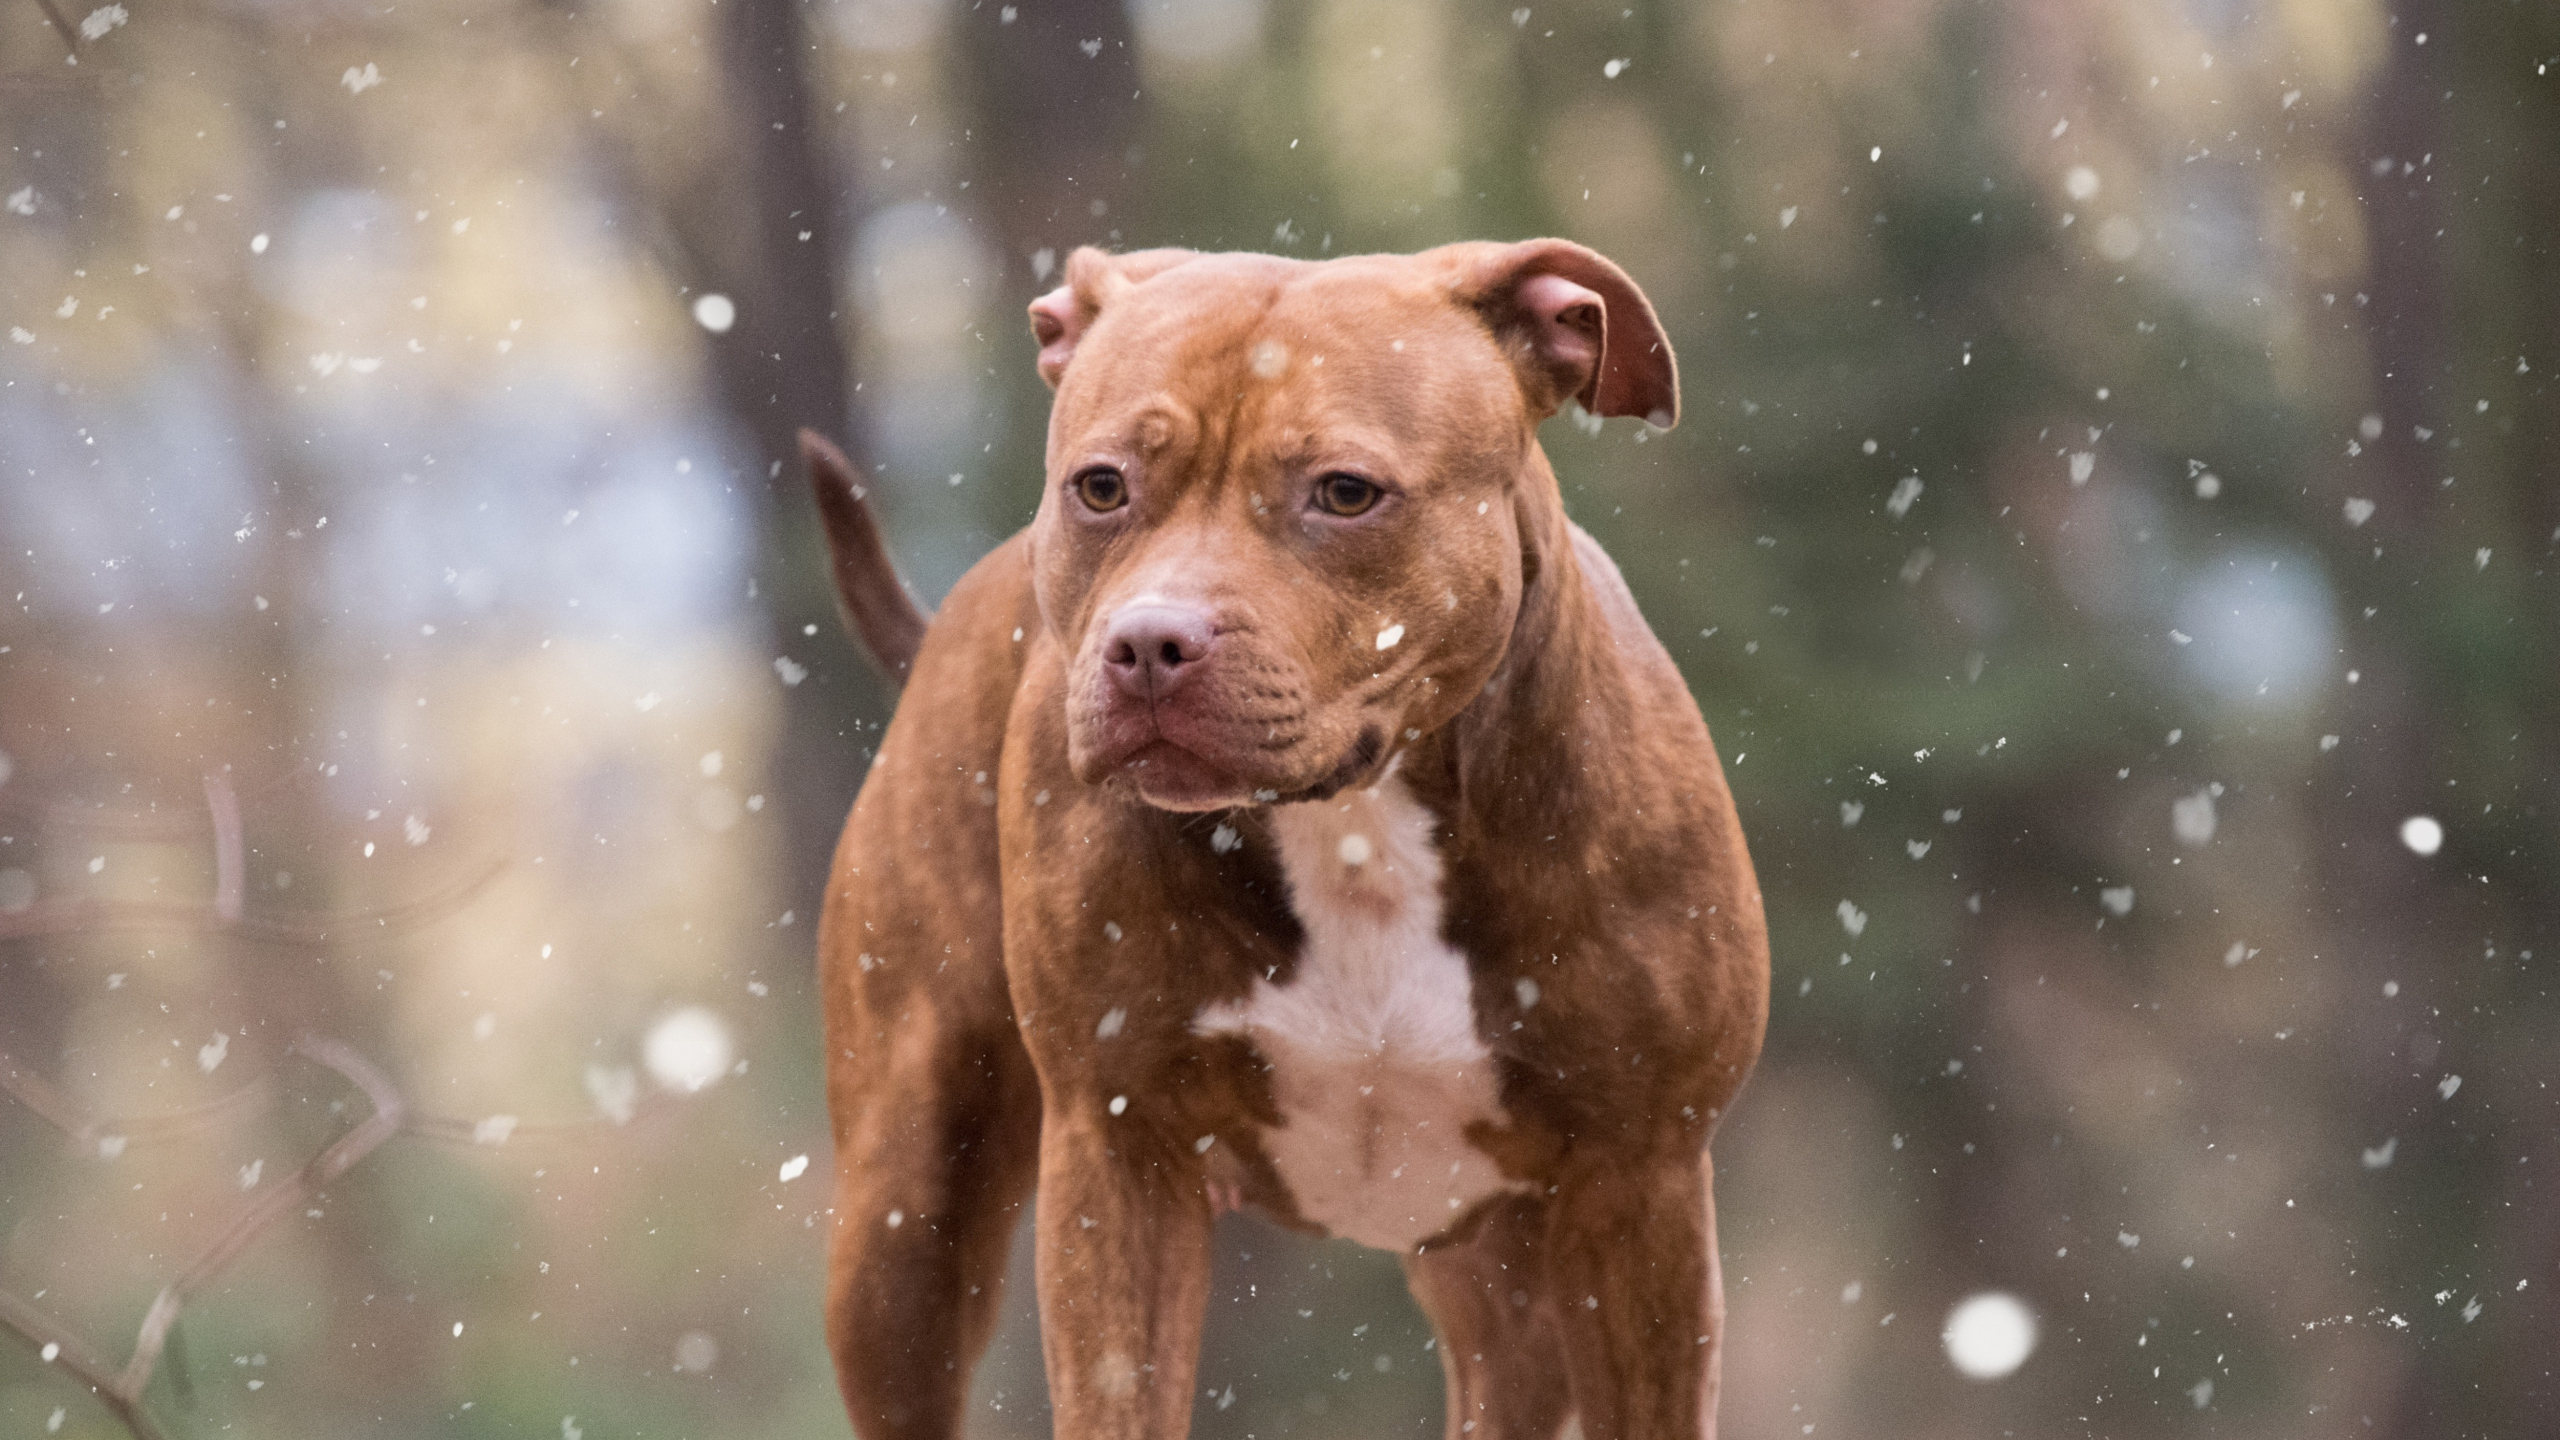 Download wallpaper 2560x1440 pit bull, dog, winter, dual wide 16:9  2560x1440 hd background, 3742